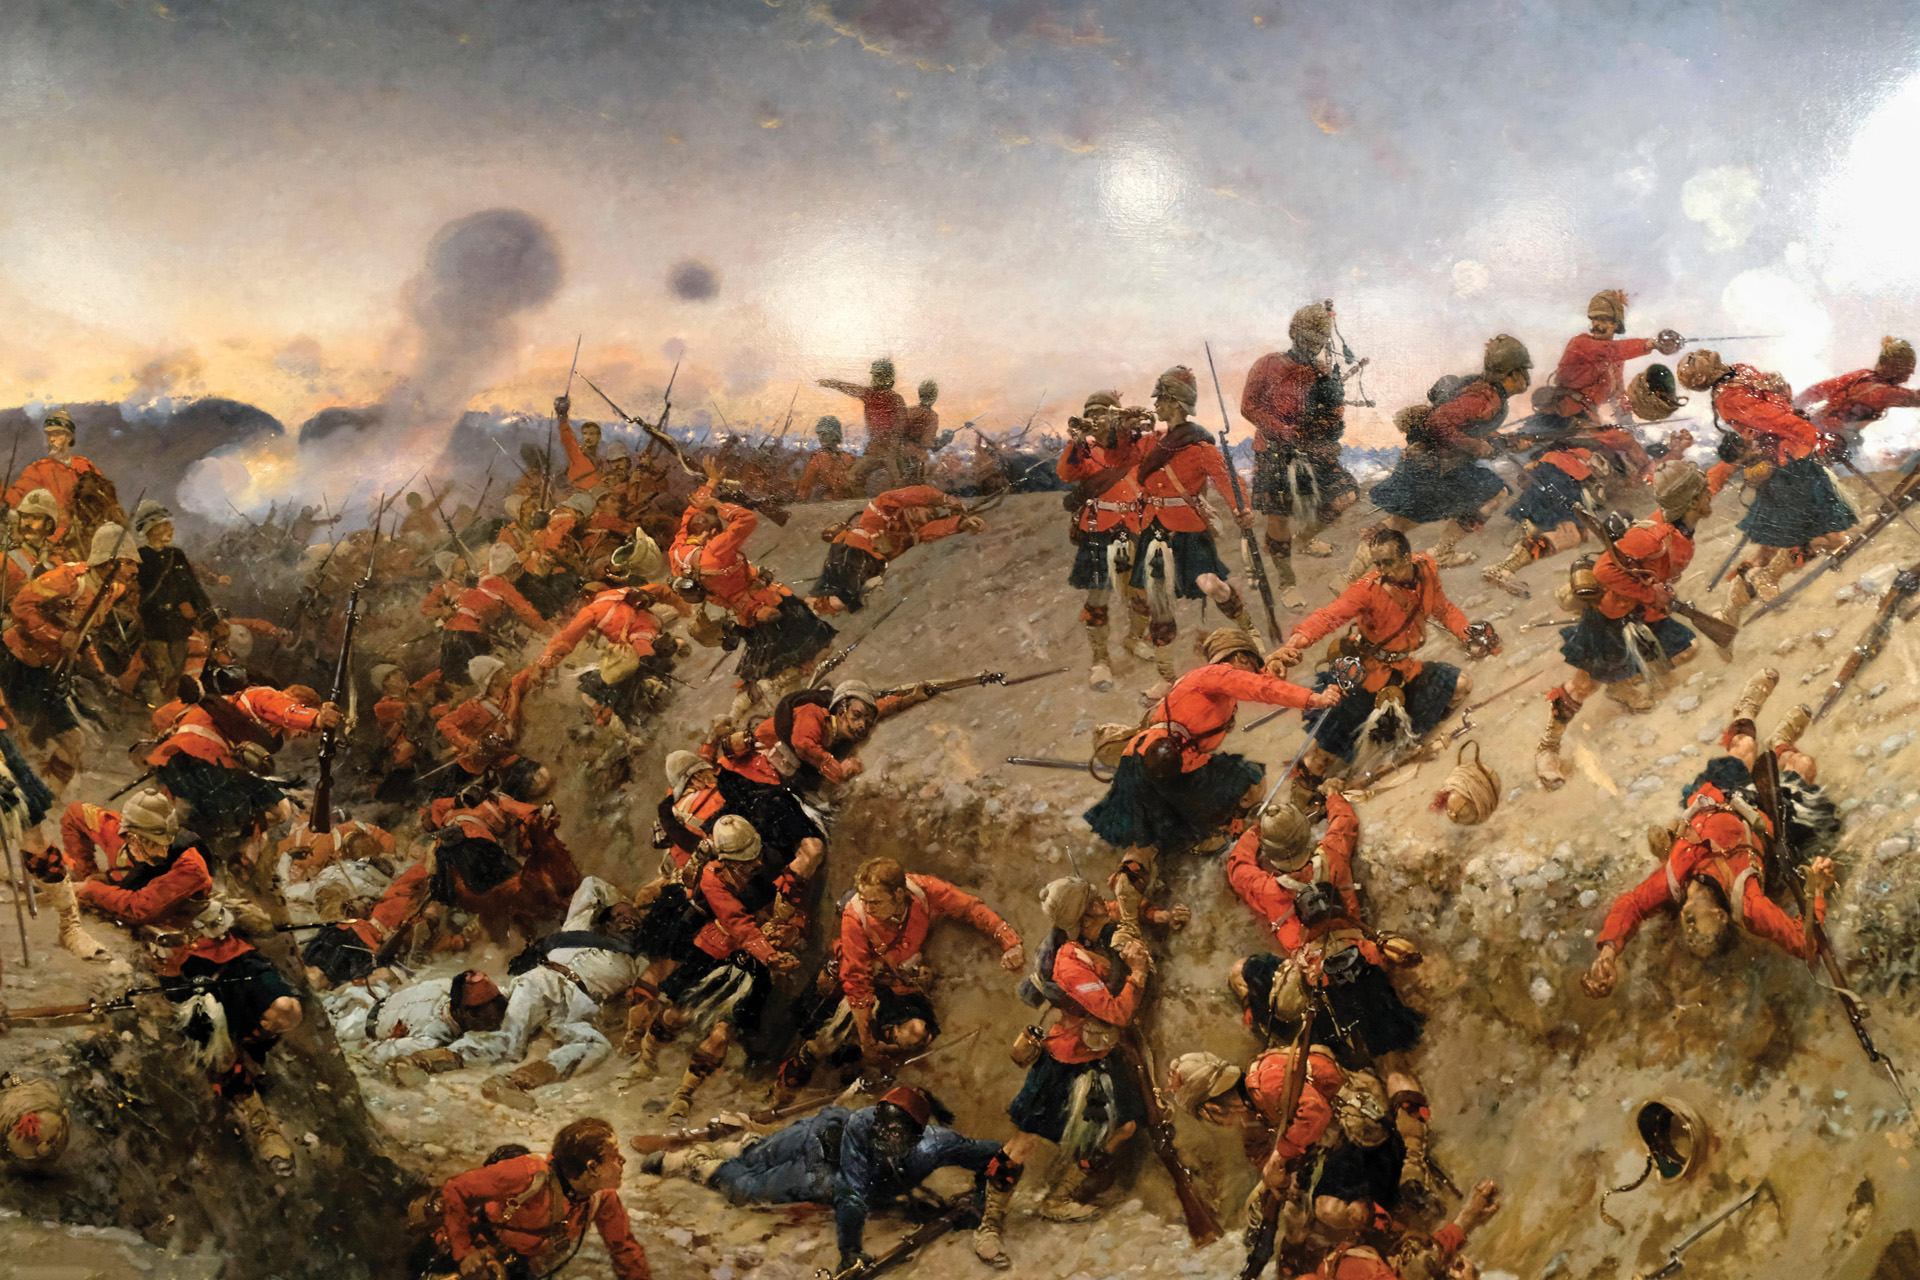 Soldiers of the 42nd Highland Regiment, known as the Black Watch, braved murderous fire in their assault on the entrenchments of the Egyptian national army.